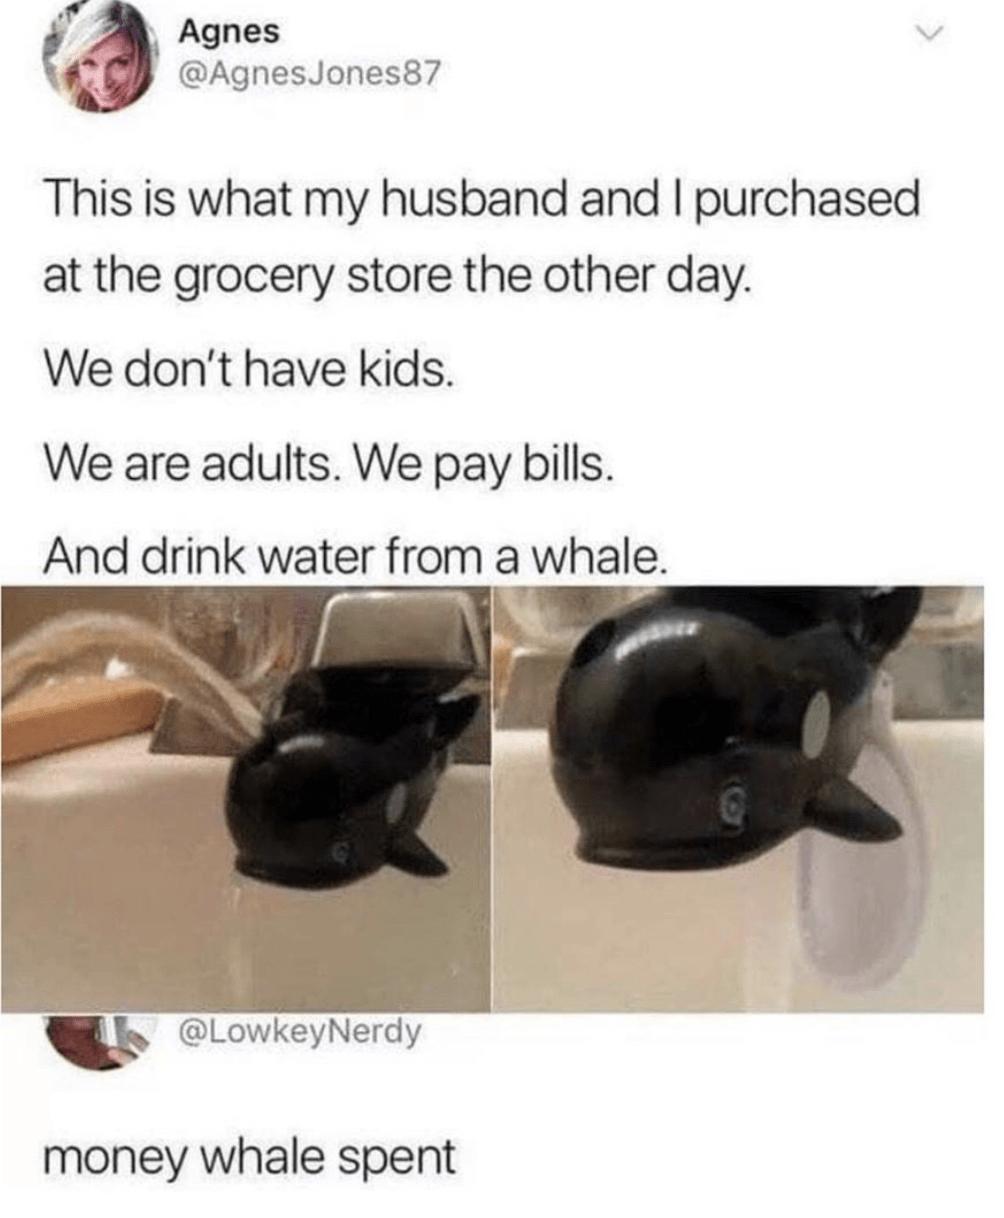 money whale spent - Agnes Jones87 This is what my husband and I purchased at the grocery store the other day. We don't have kids. We are adults. We pay bills. And drink water from a whale. 1 money whale spent